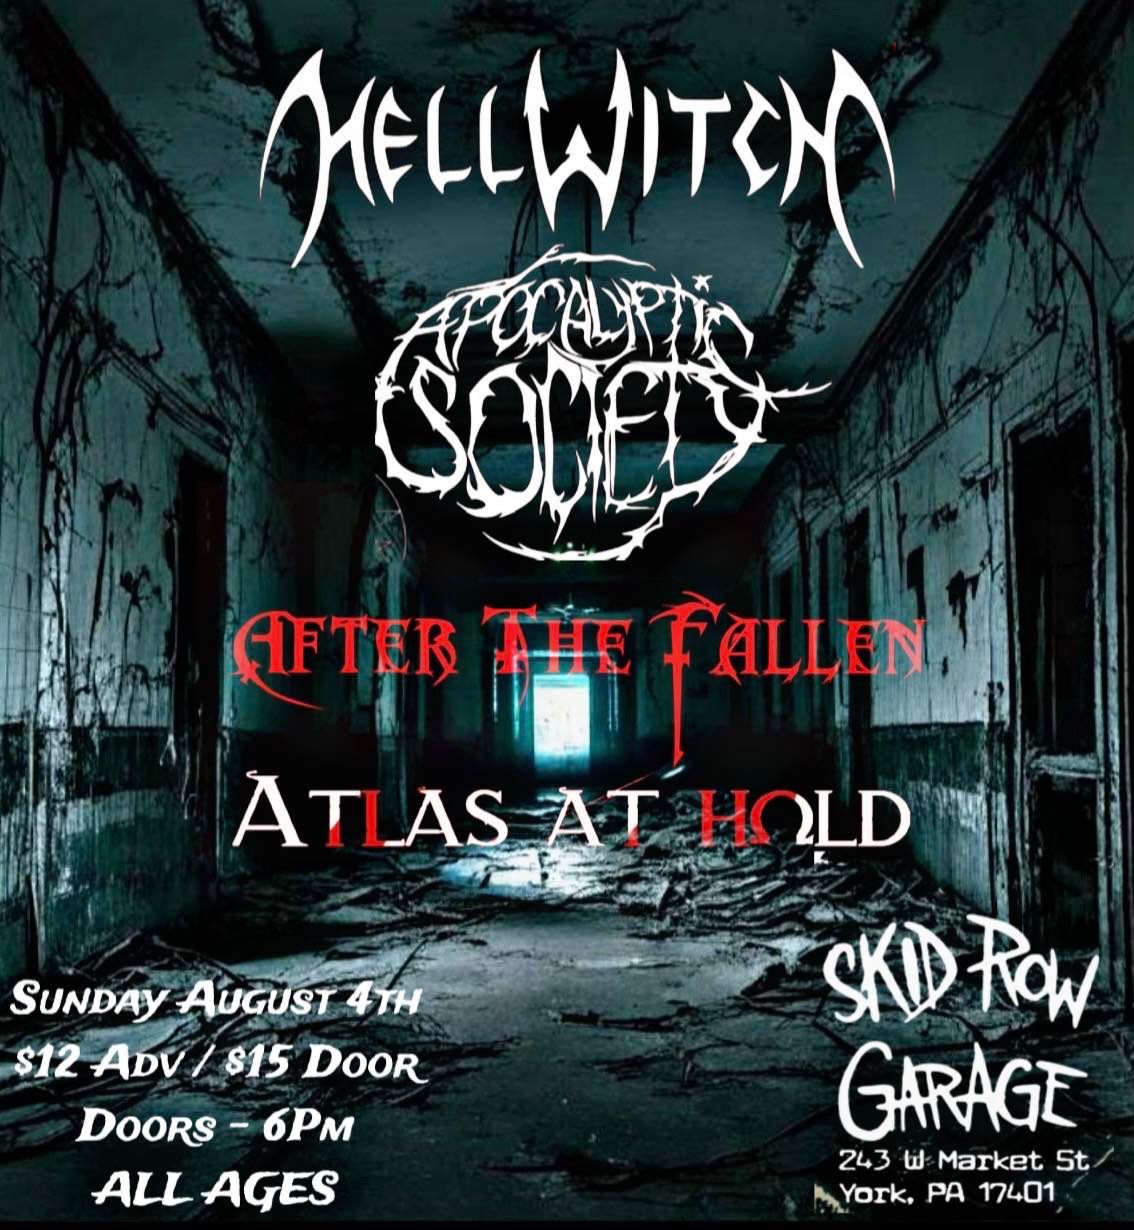 Hellwitch, Apocalyptic Society, After the Fallen, Atlas at Hold at Skid Row Garage